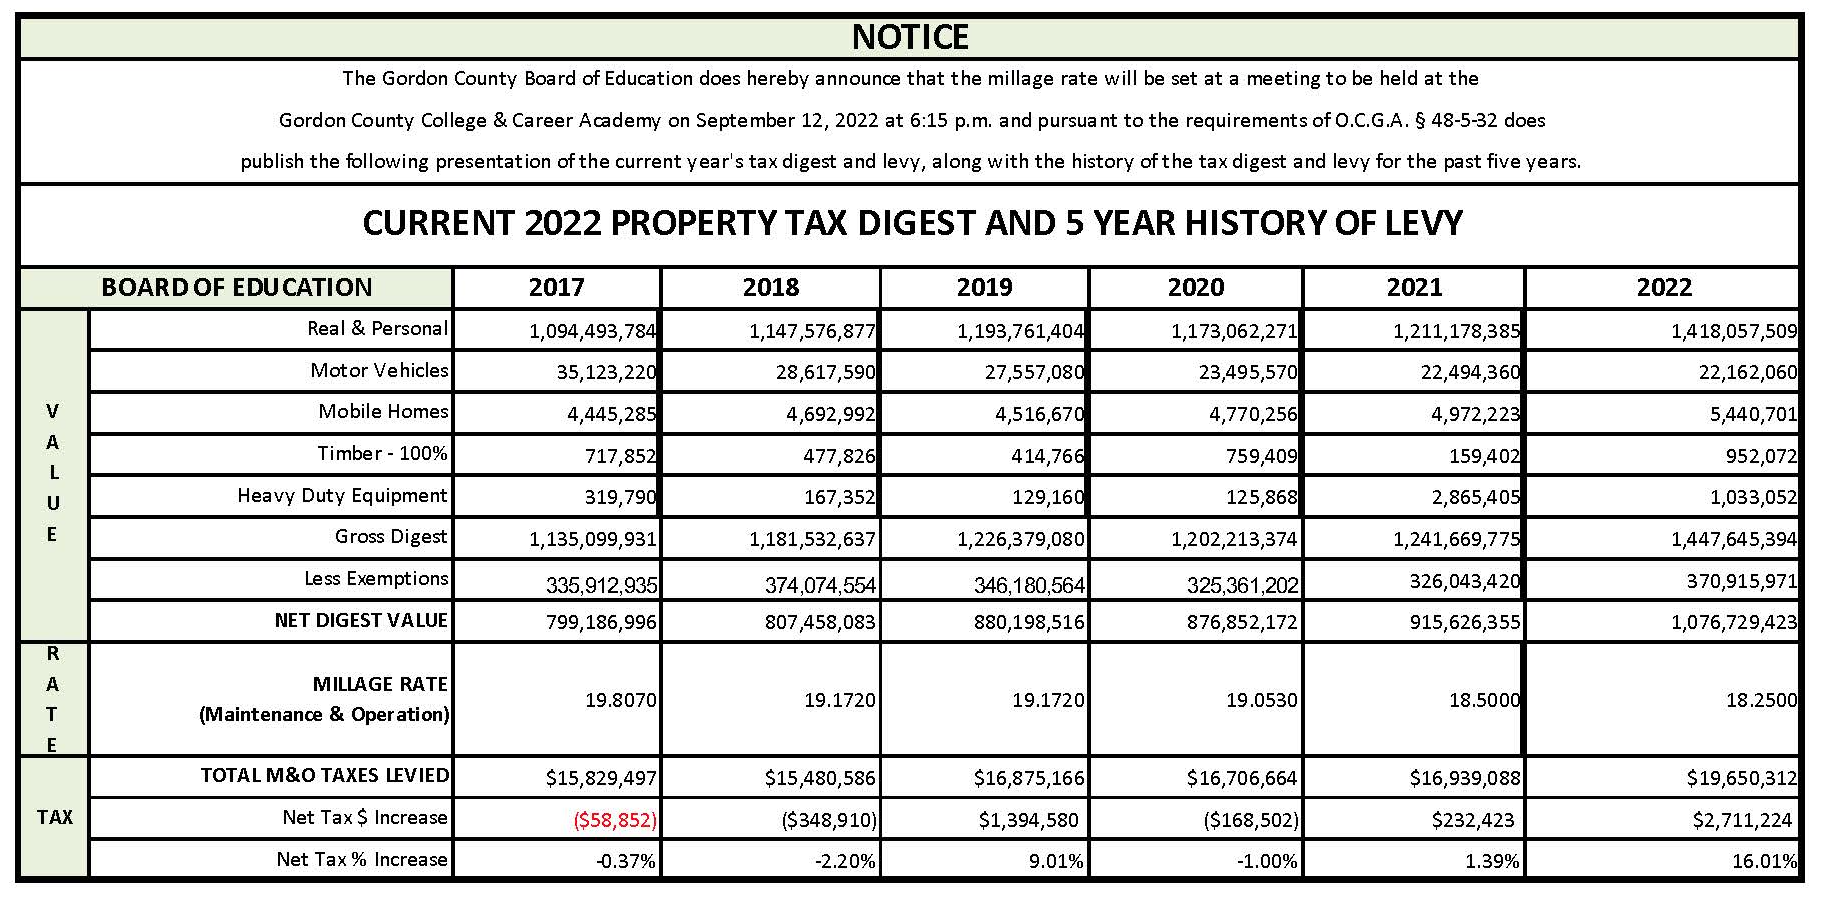 Current 2022 Tax Digest and 5 Year History of Levy - If this image is not loading, a PDF download copy is available directly below the image